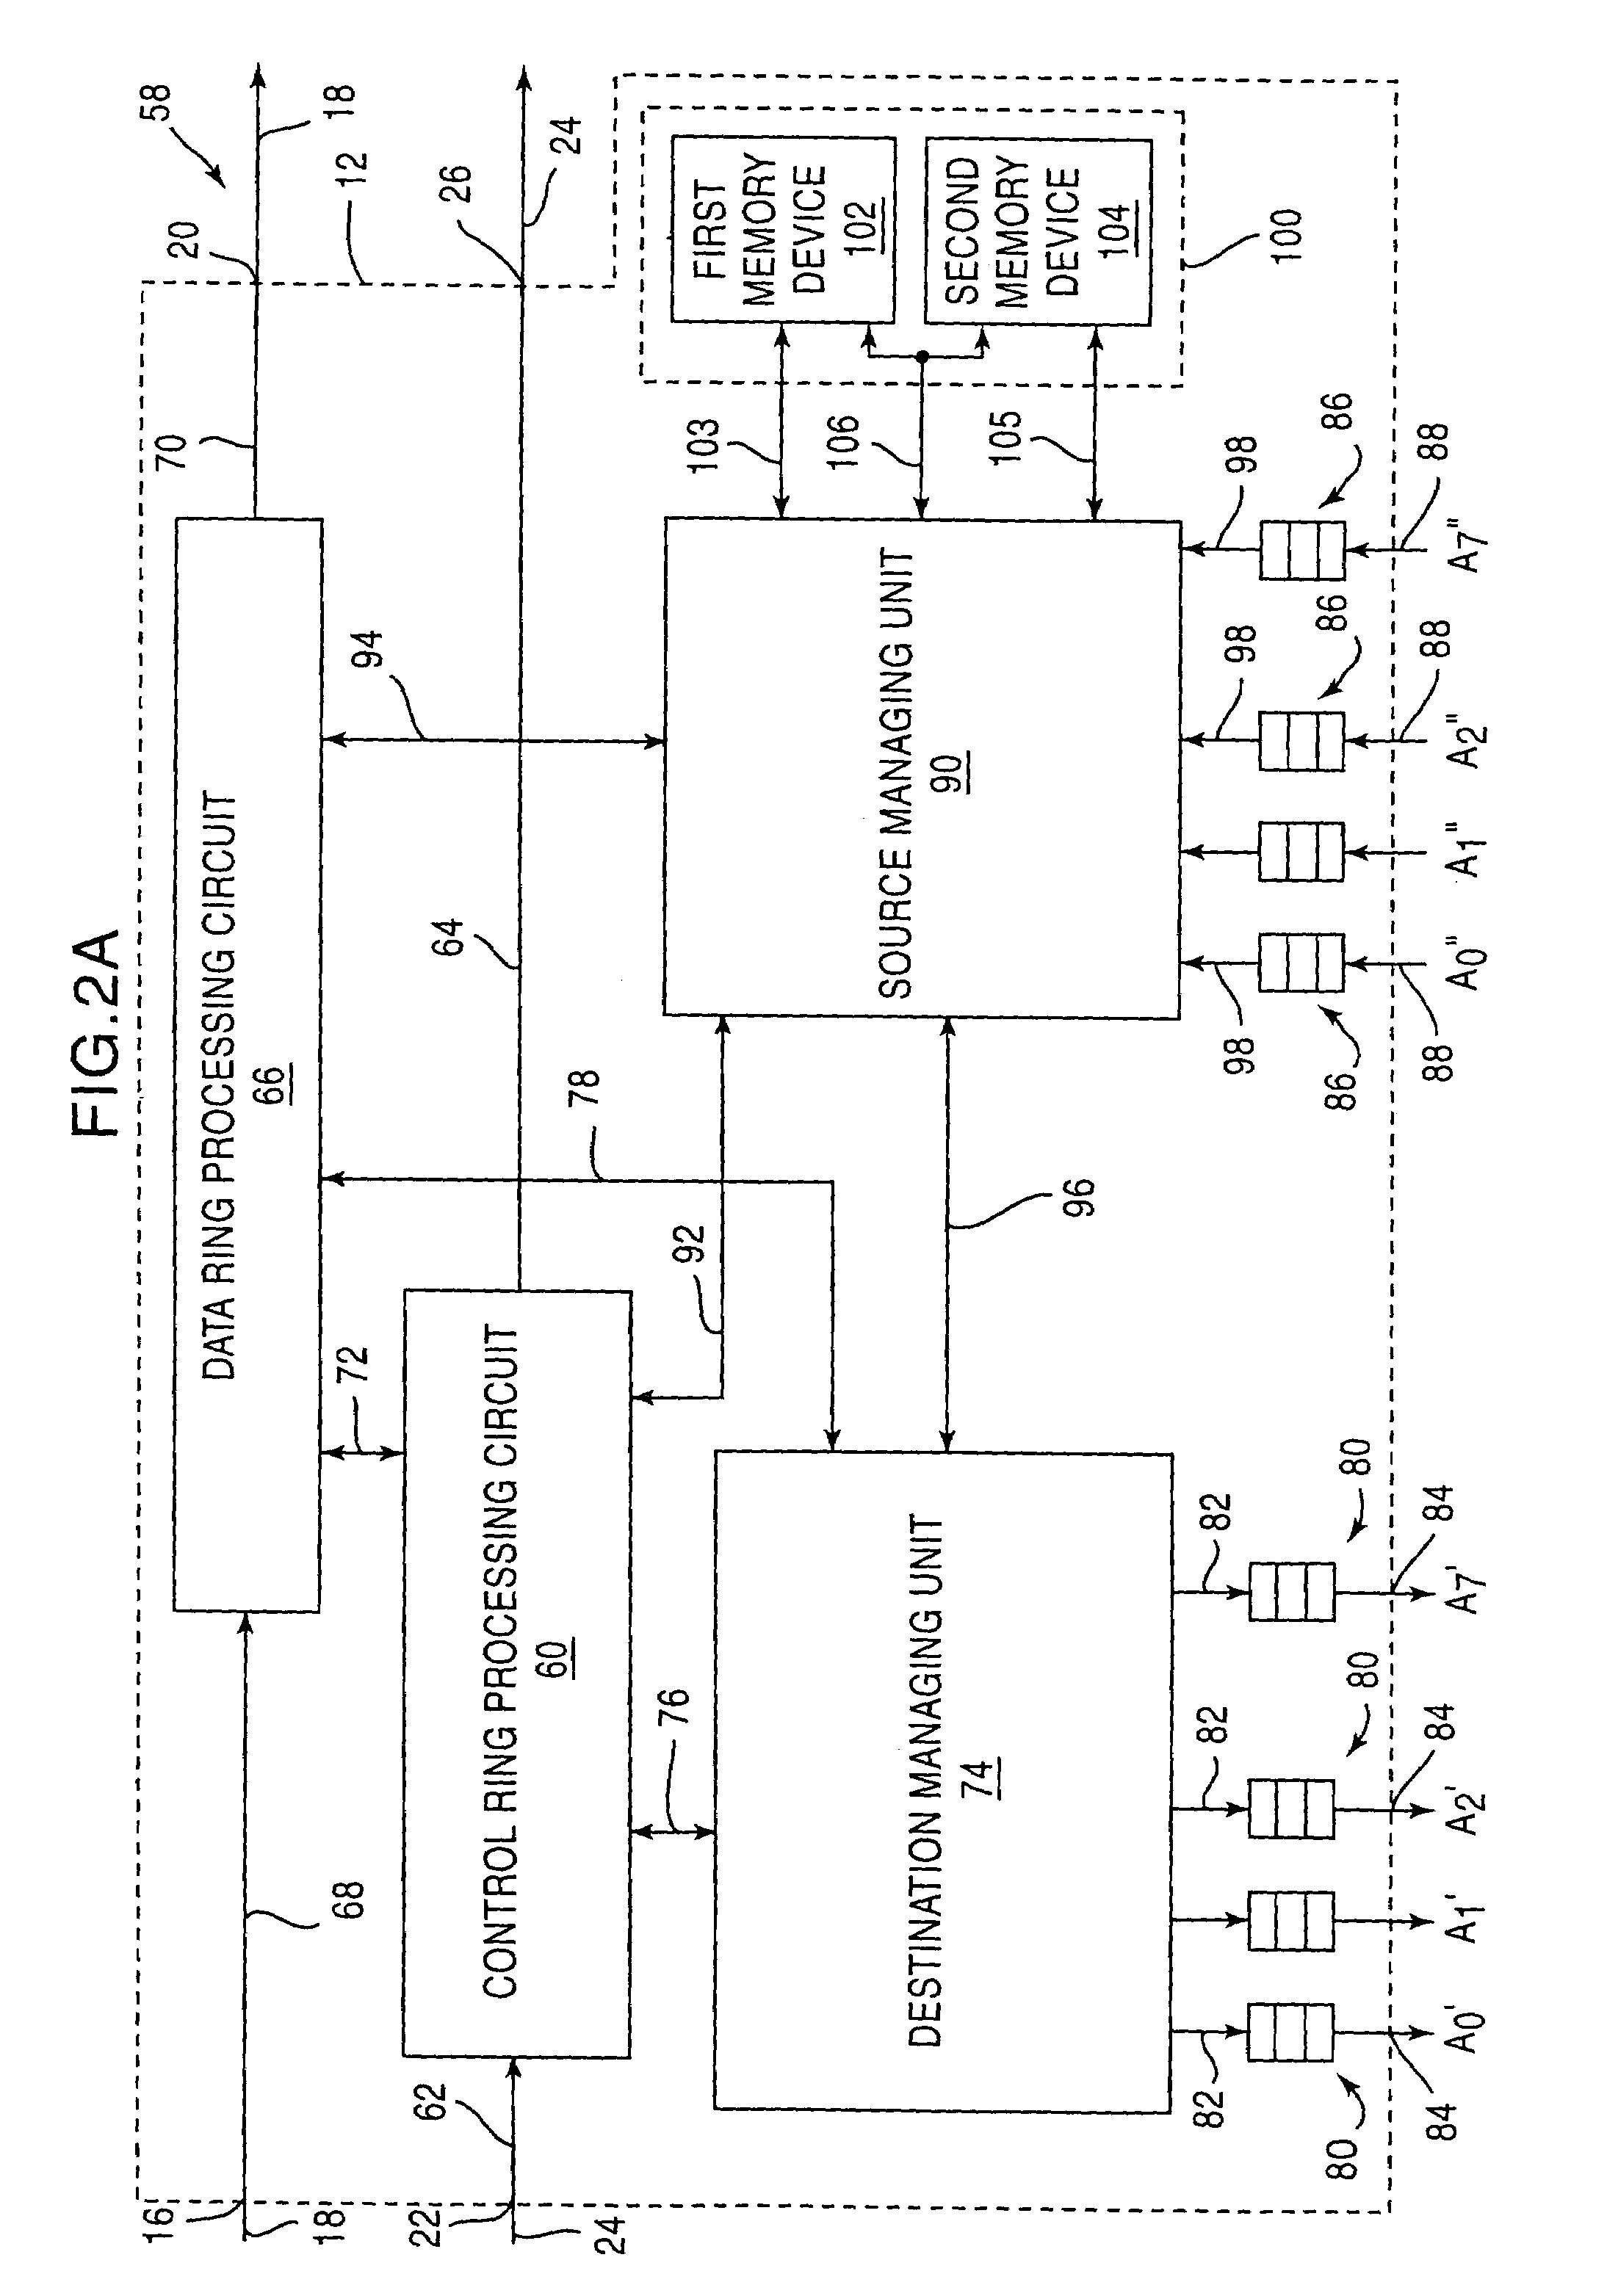 Packet switching fabric having a segmented ring with token based resource control protocol and output queuing control